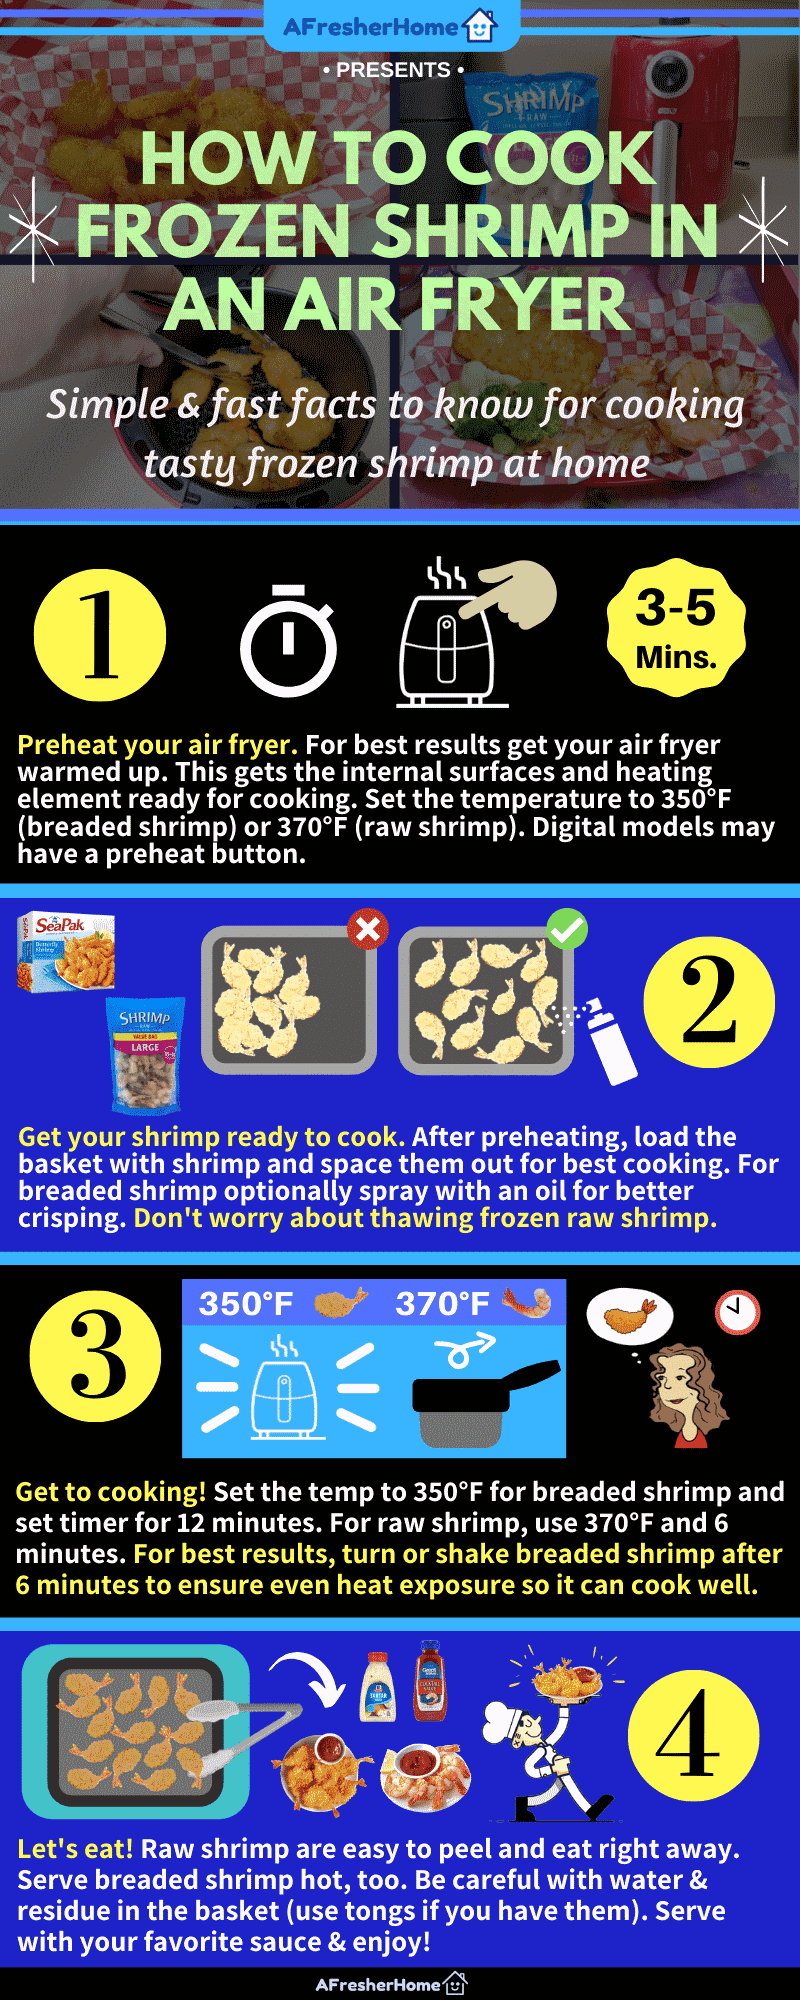 How to cook shrimp in an air fryer infographic guide